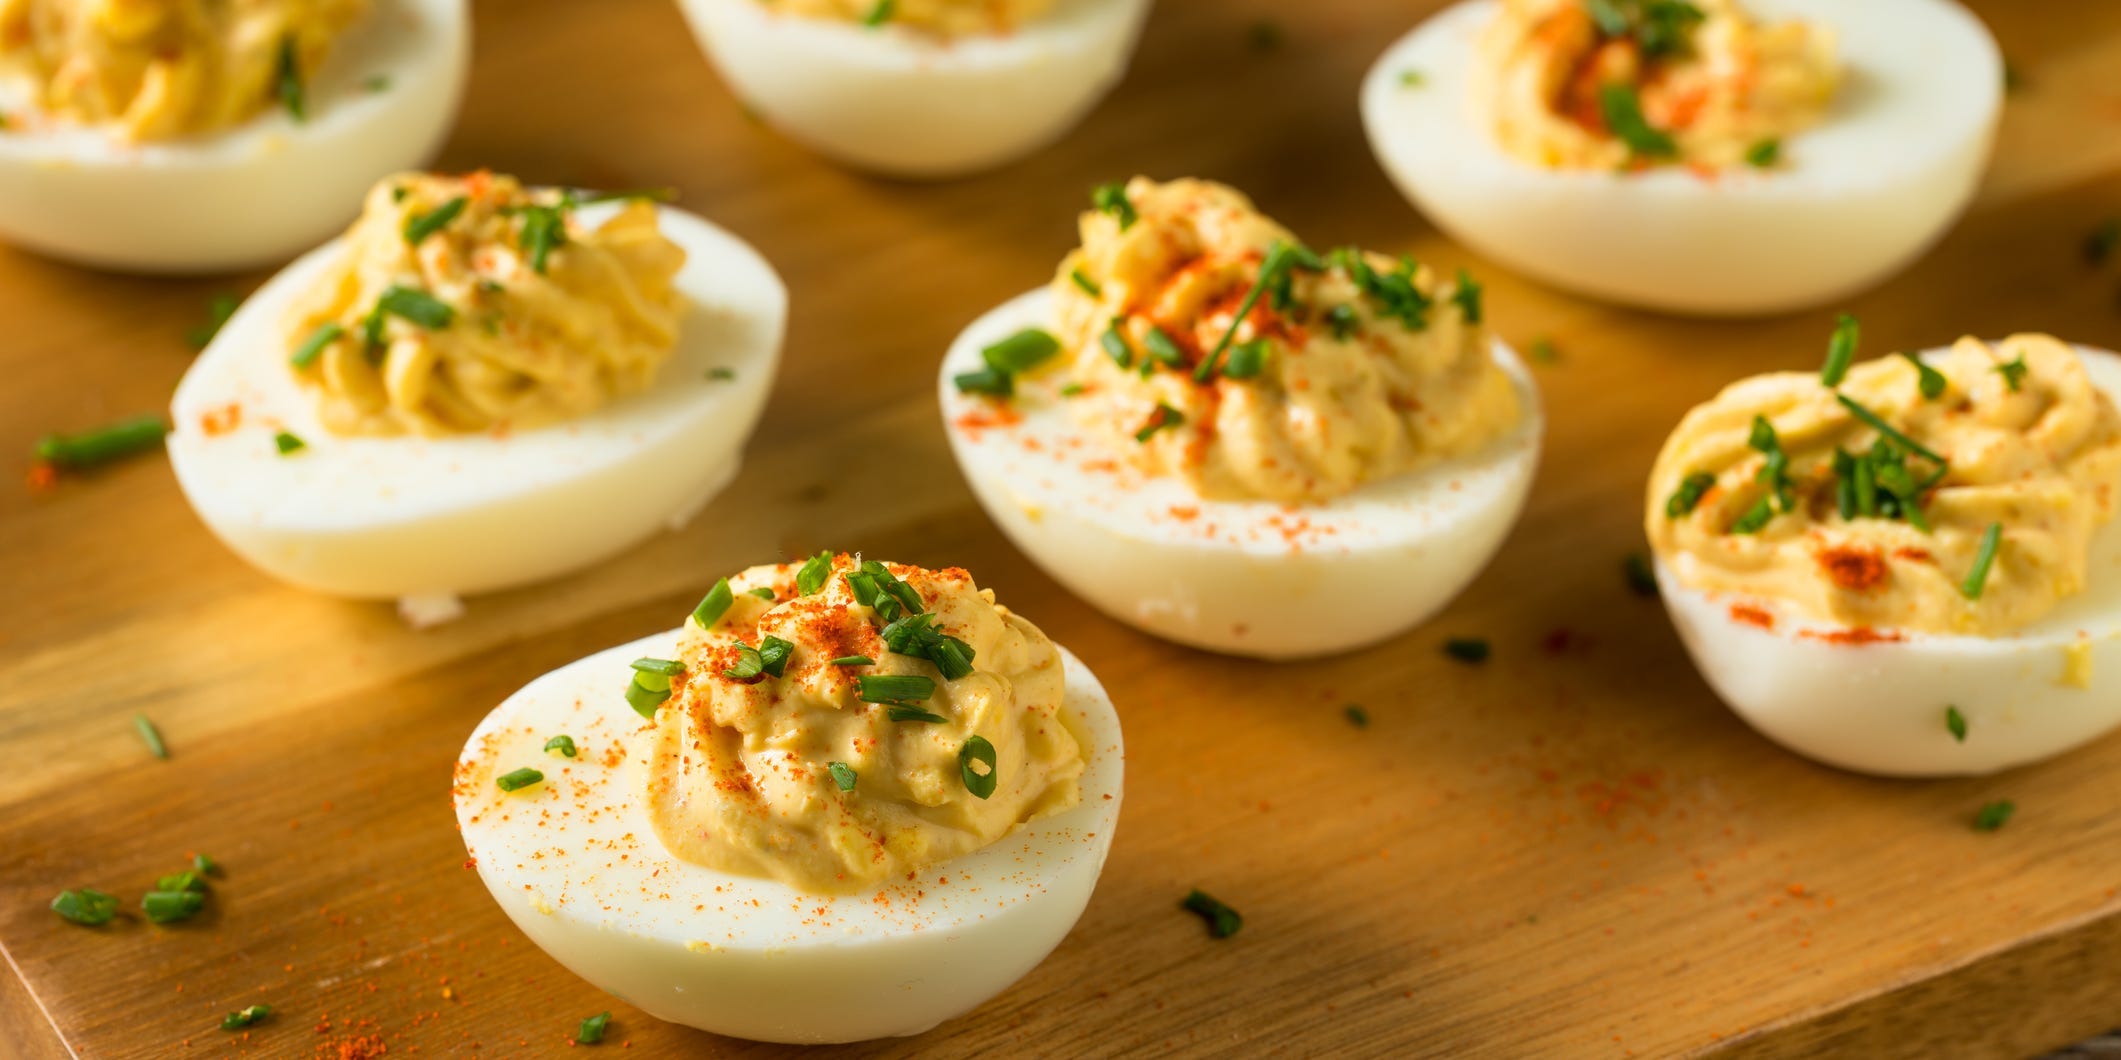 Deviled eggs topped with paprika and chives on a wooden cutting board